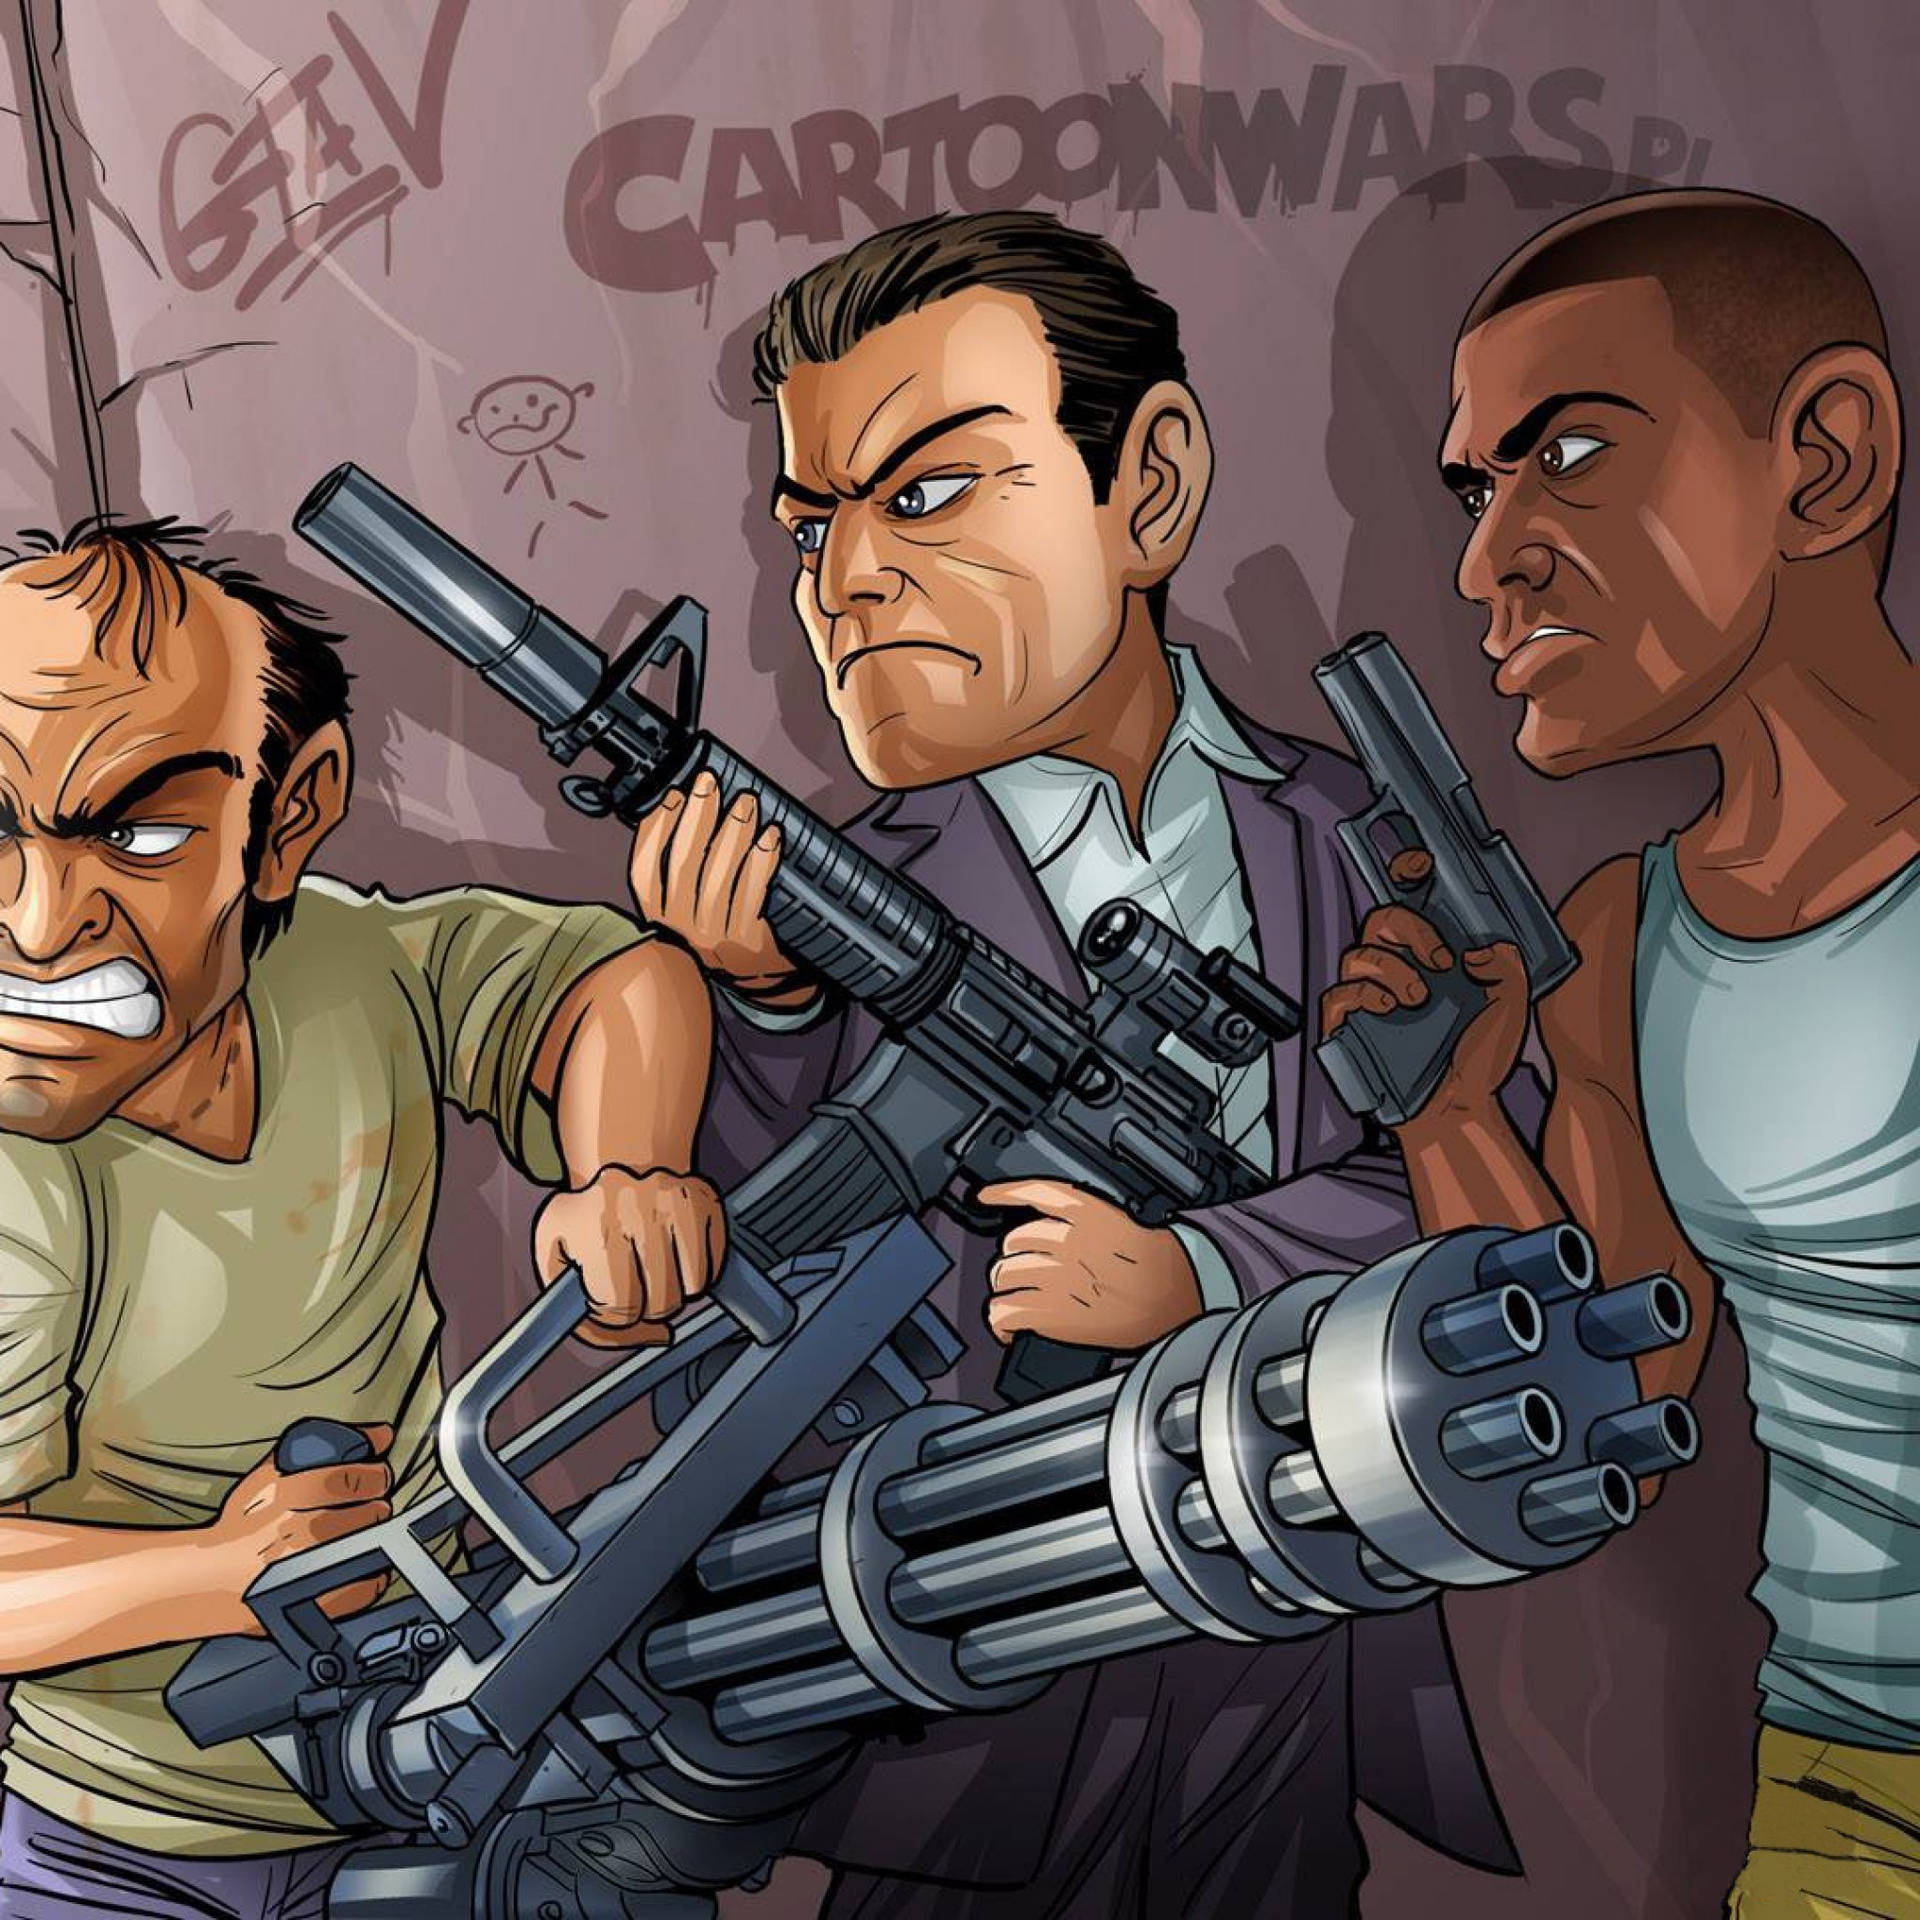 Download • Get in the driver's seat and play Grand Theft Auto 5 on your  iPhone Wallpaper